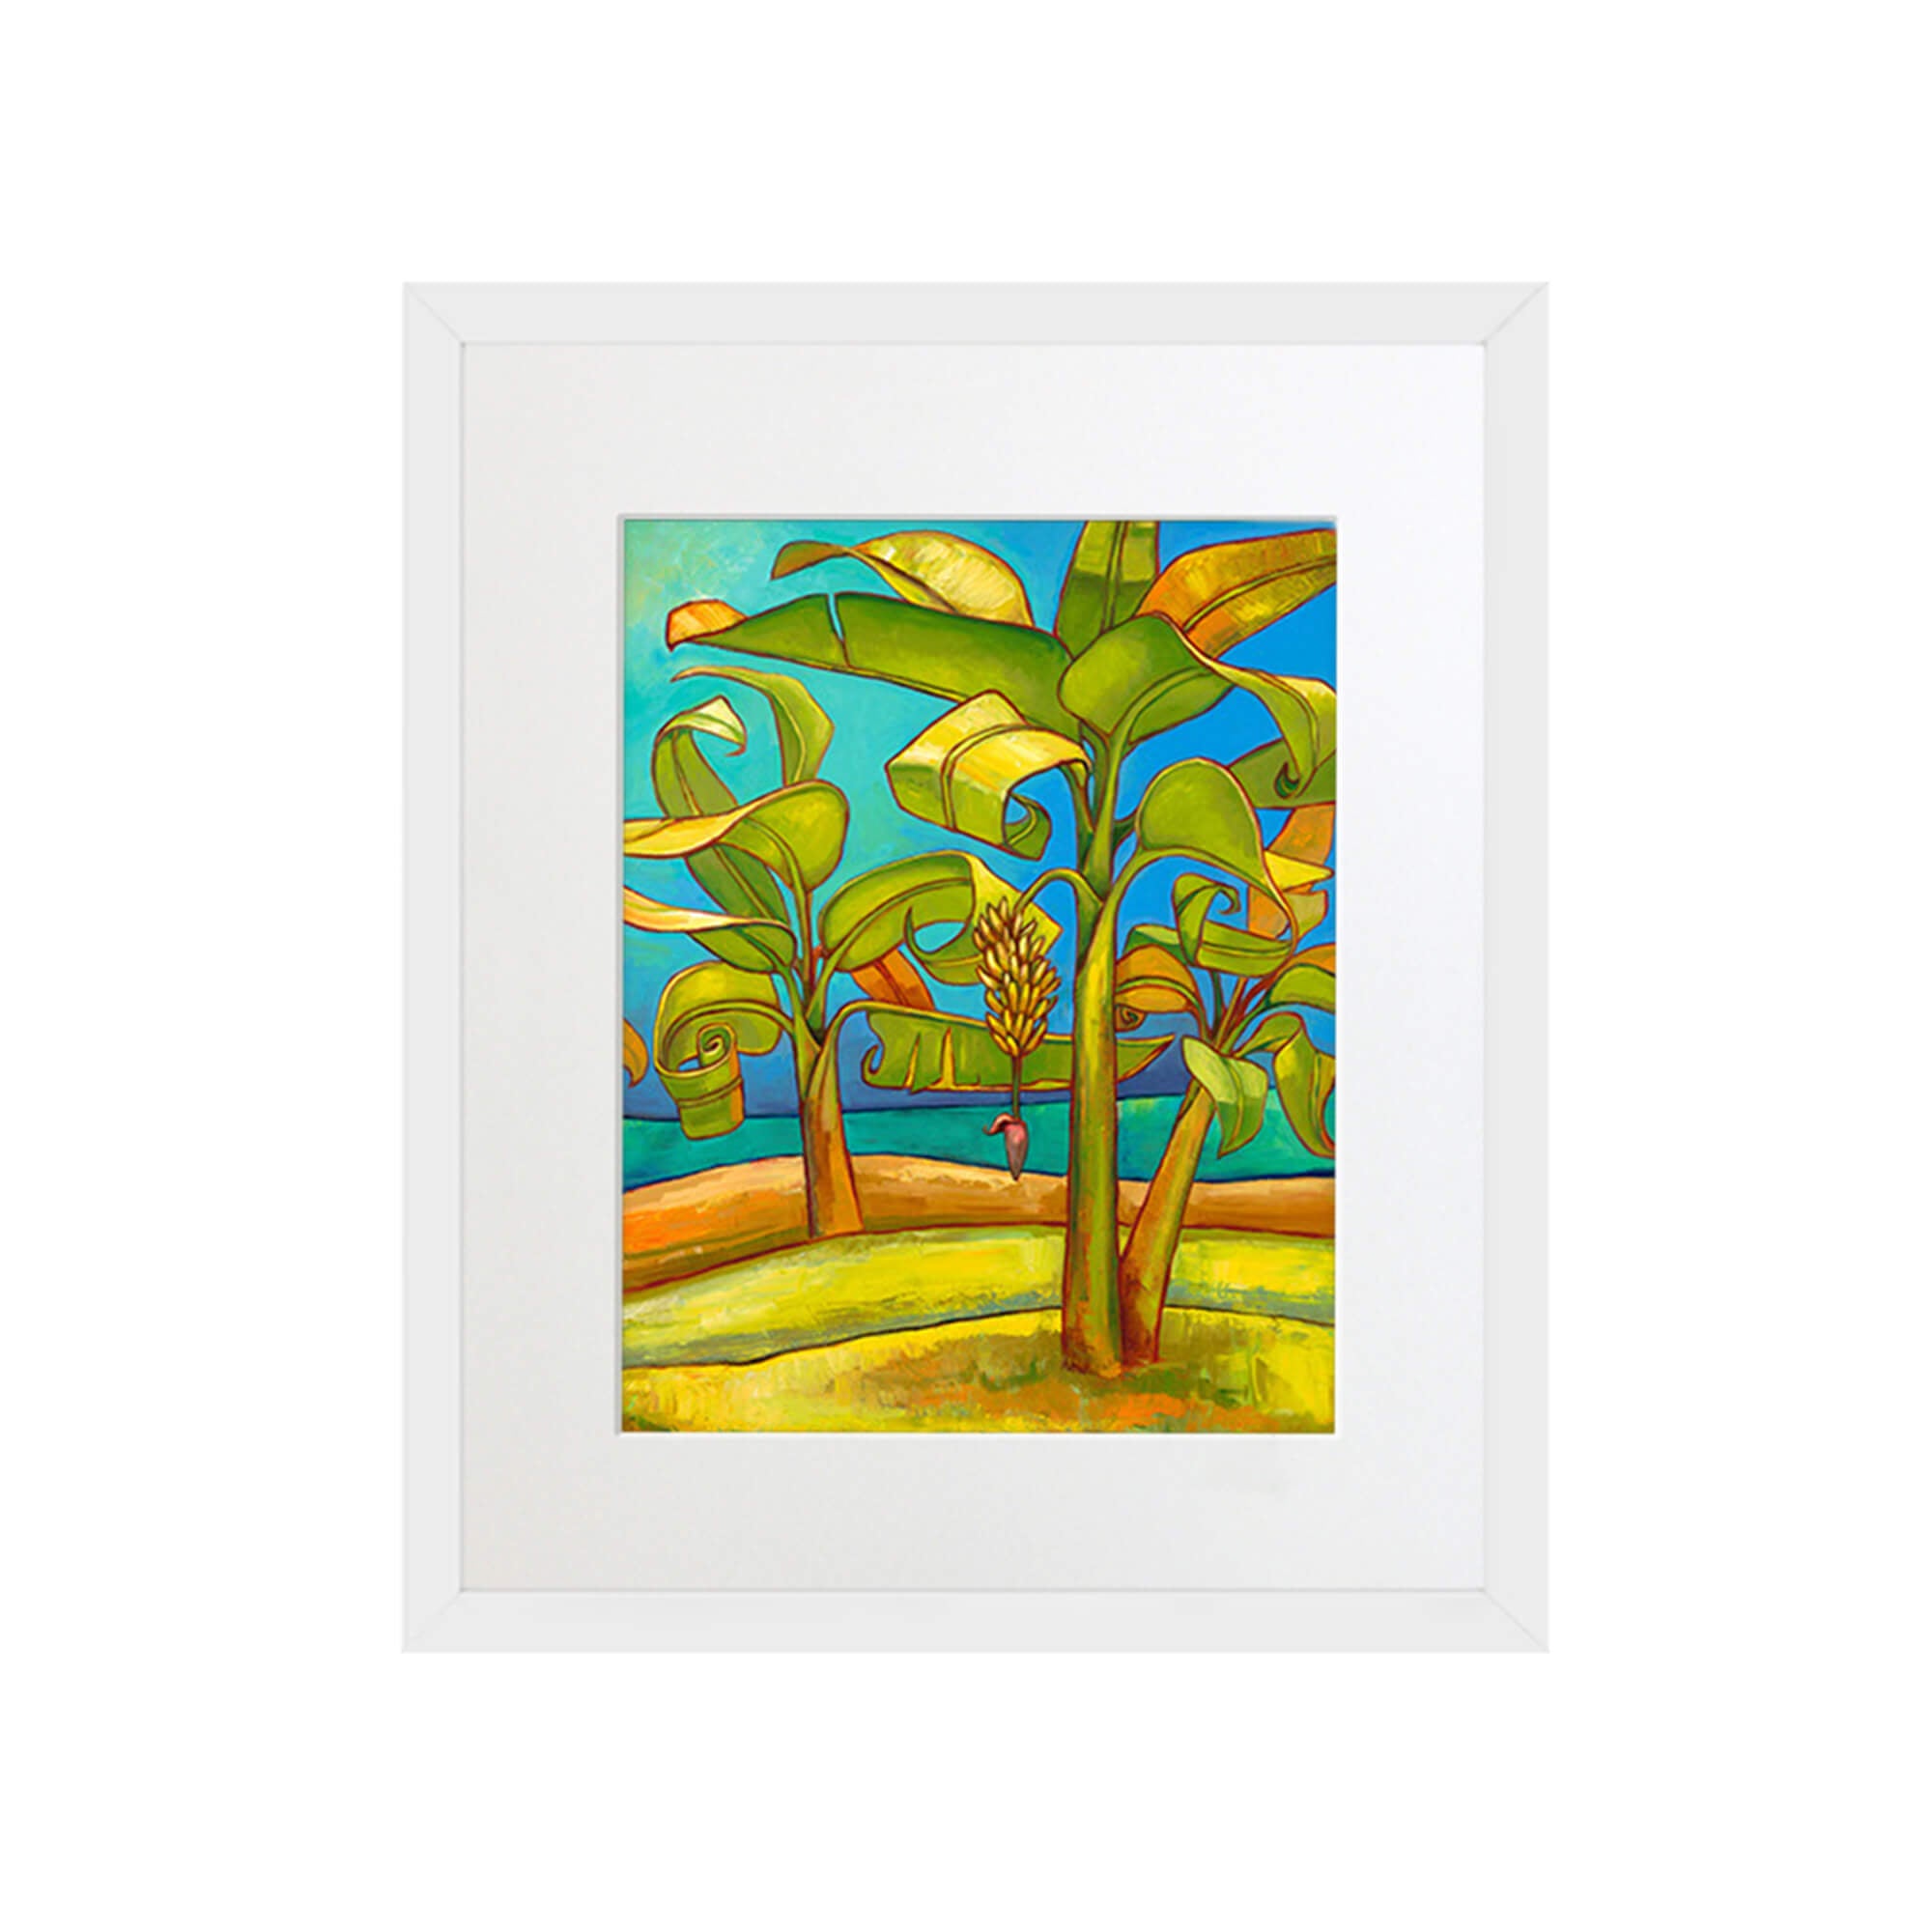 Banana trees under a clear blue sky by Hawaii artist Colin redican